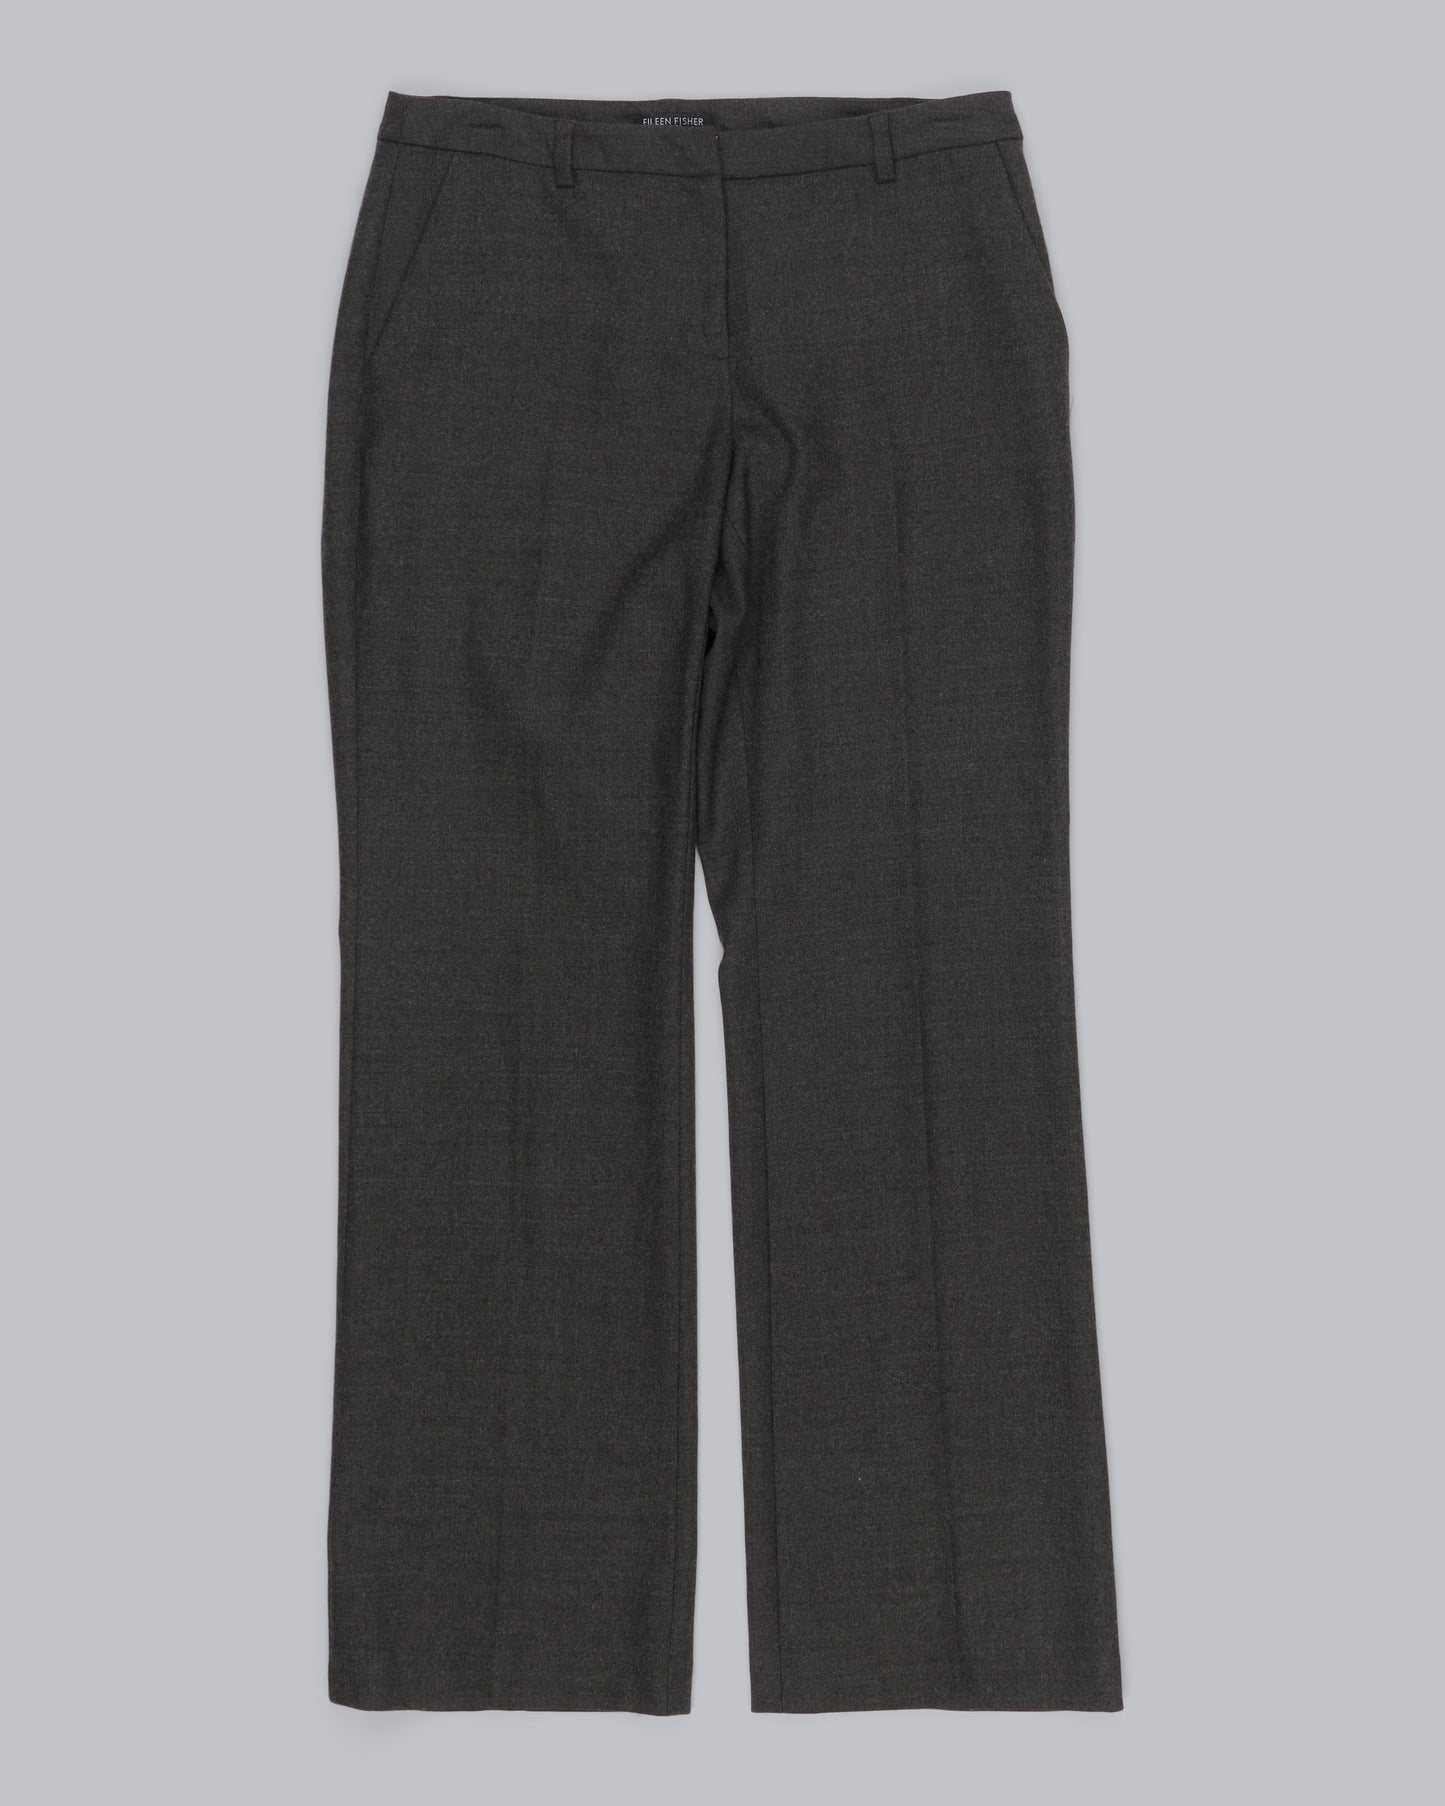 Heathered Stretch Flannel Twill Pant